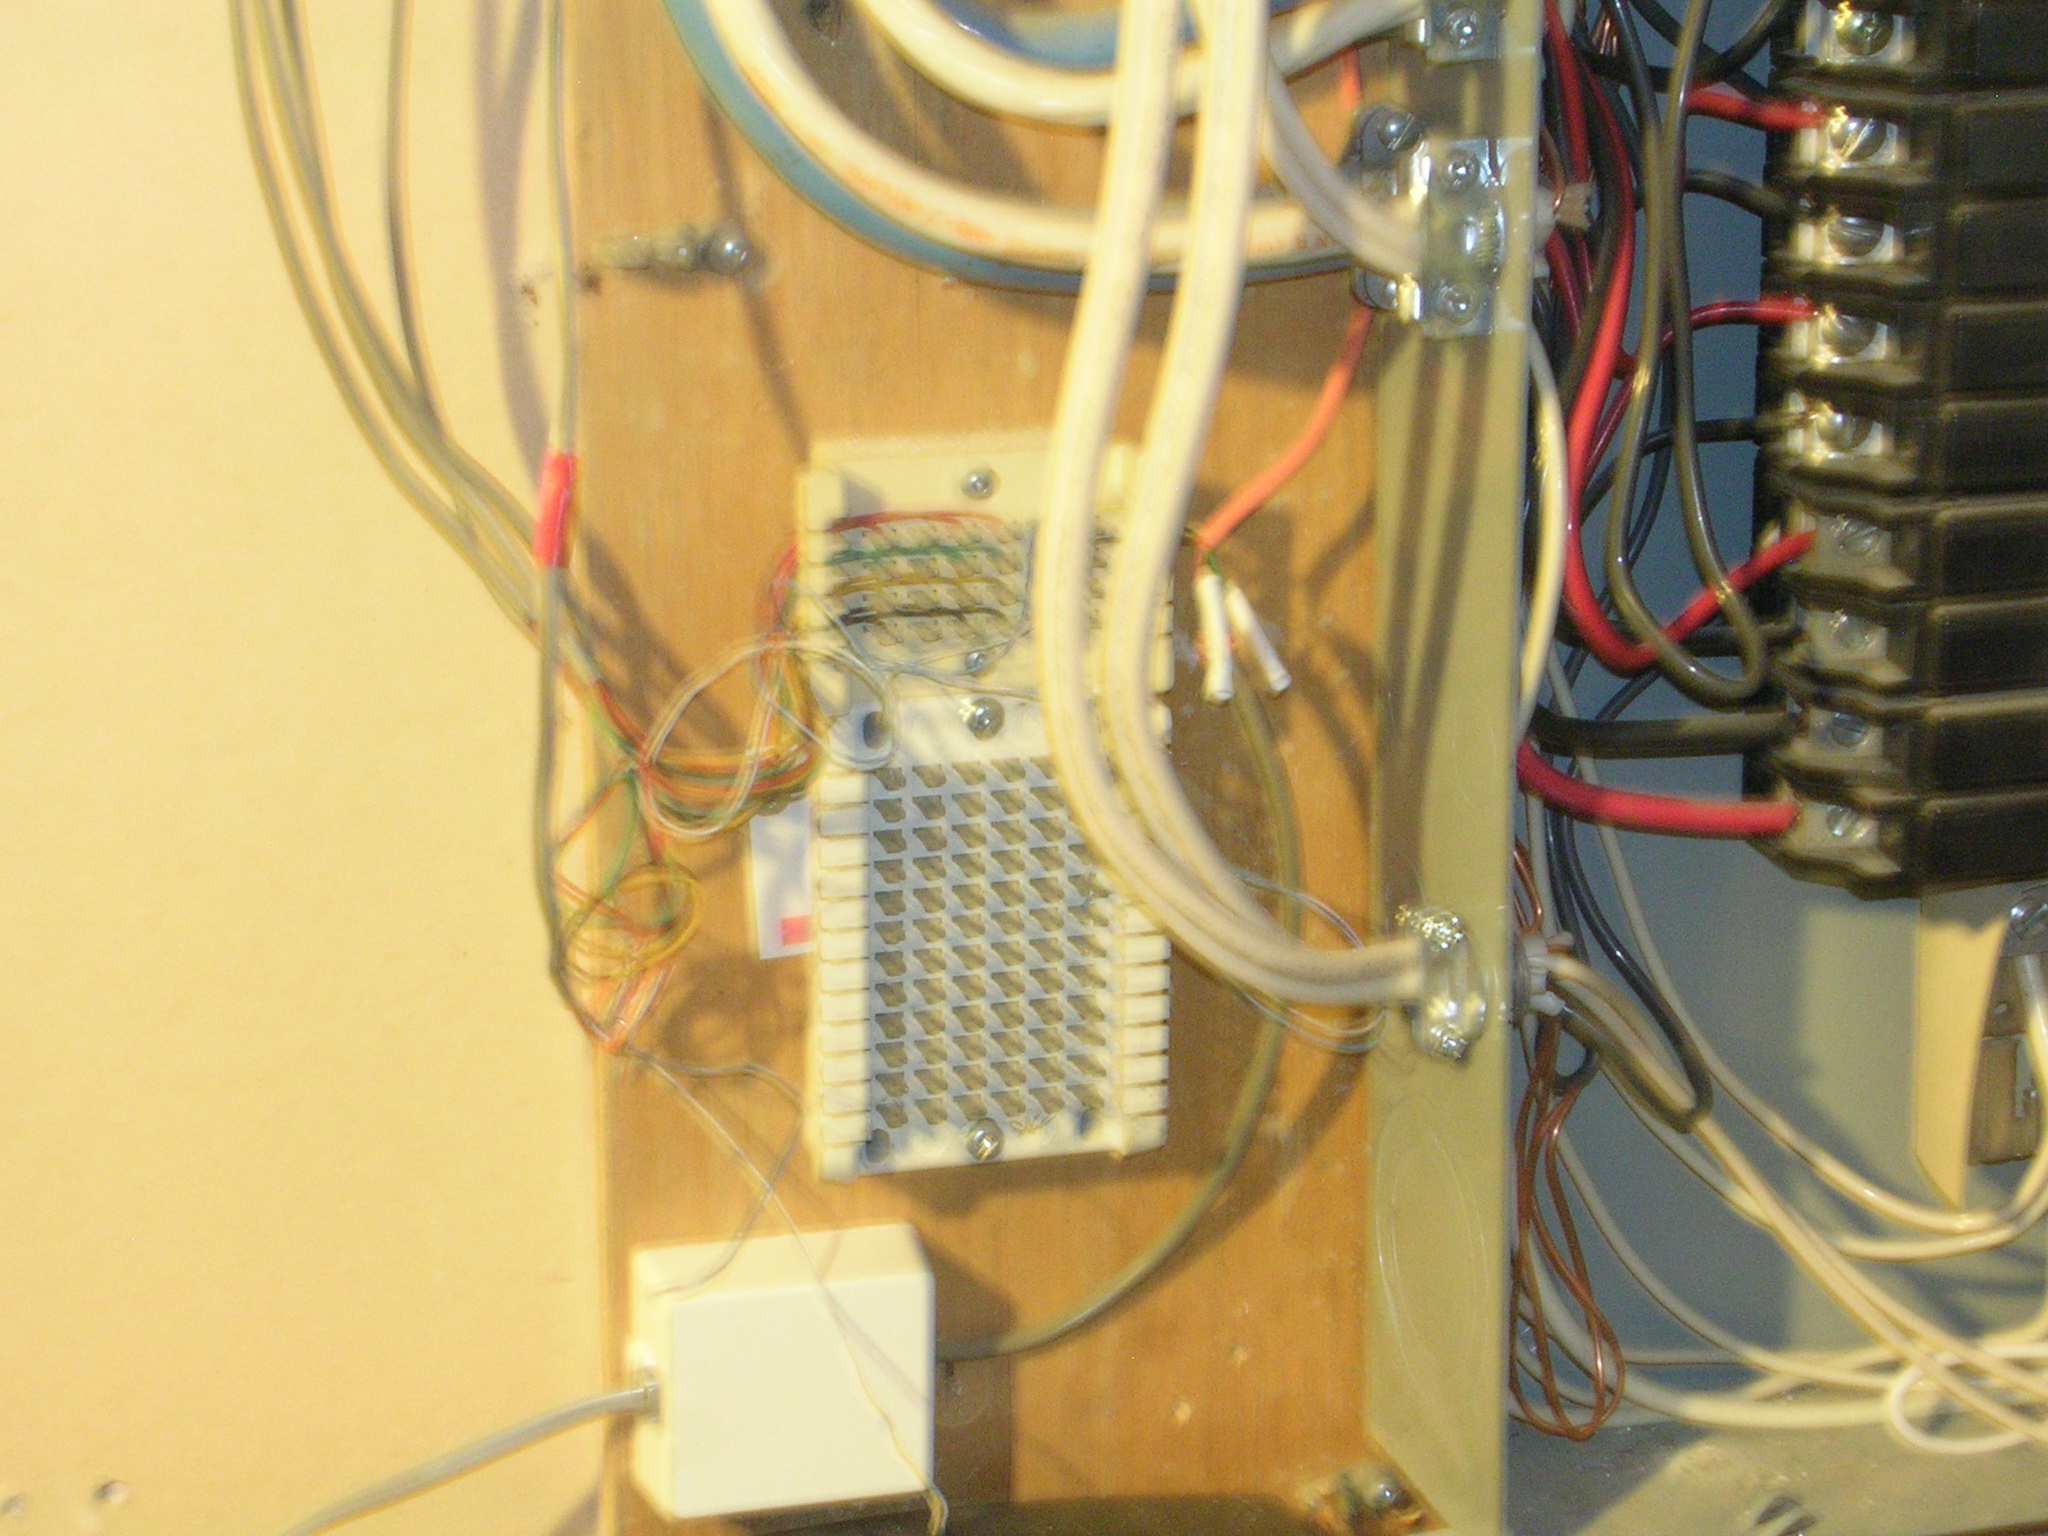 BAD HOUSE WIRING WE MADE PROPER! TO CODE